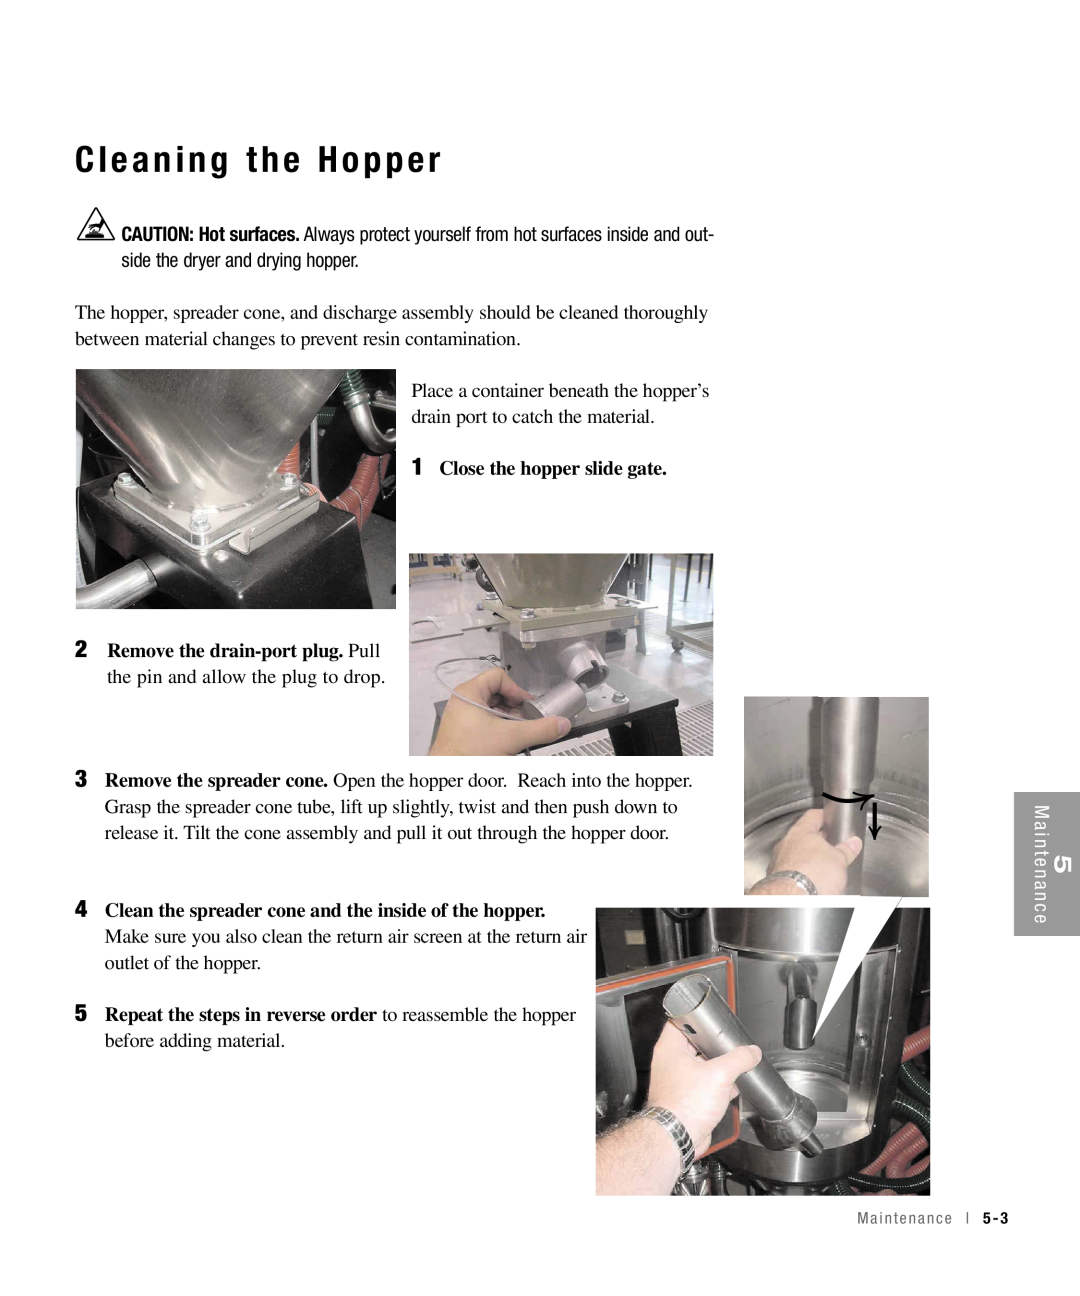 Conair 100, 25, 15, 50 specifications Cleaning the Hopper, M a i n t e n a n c e 